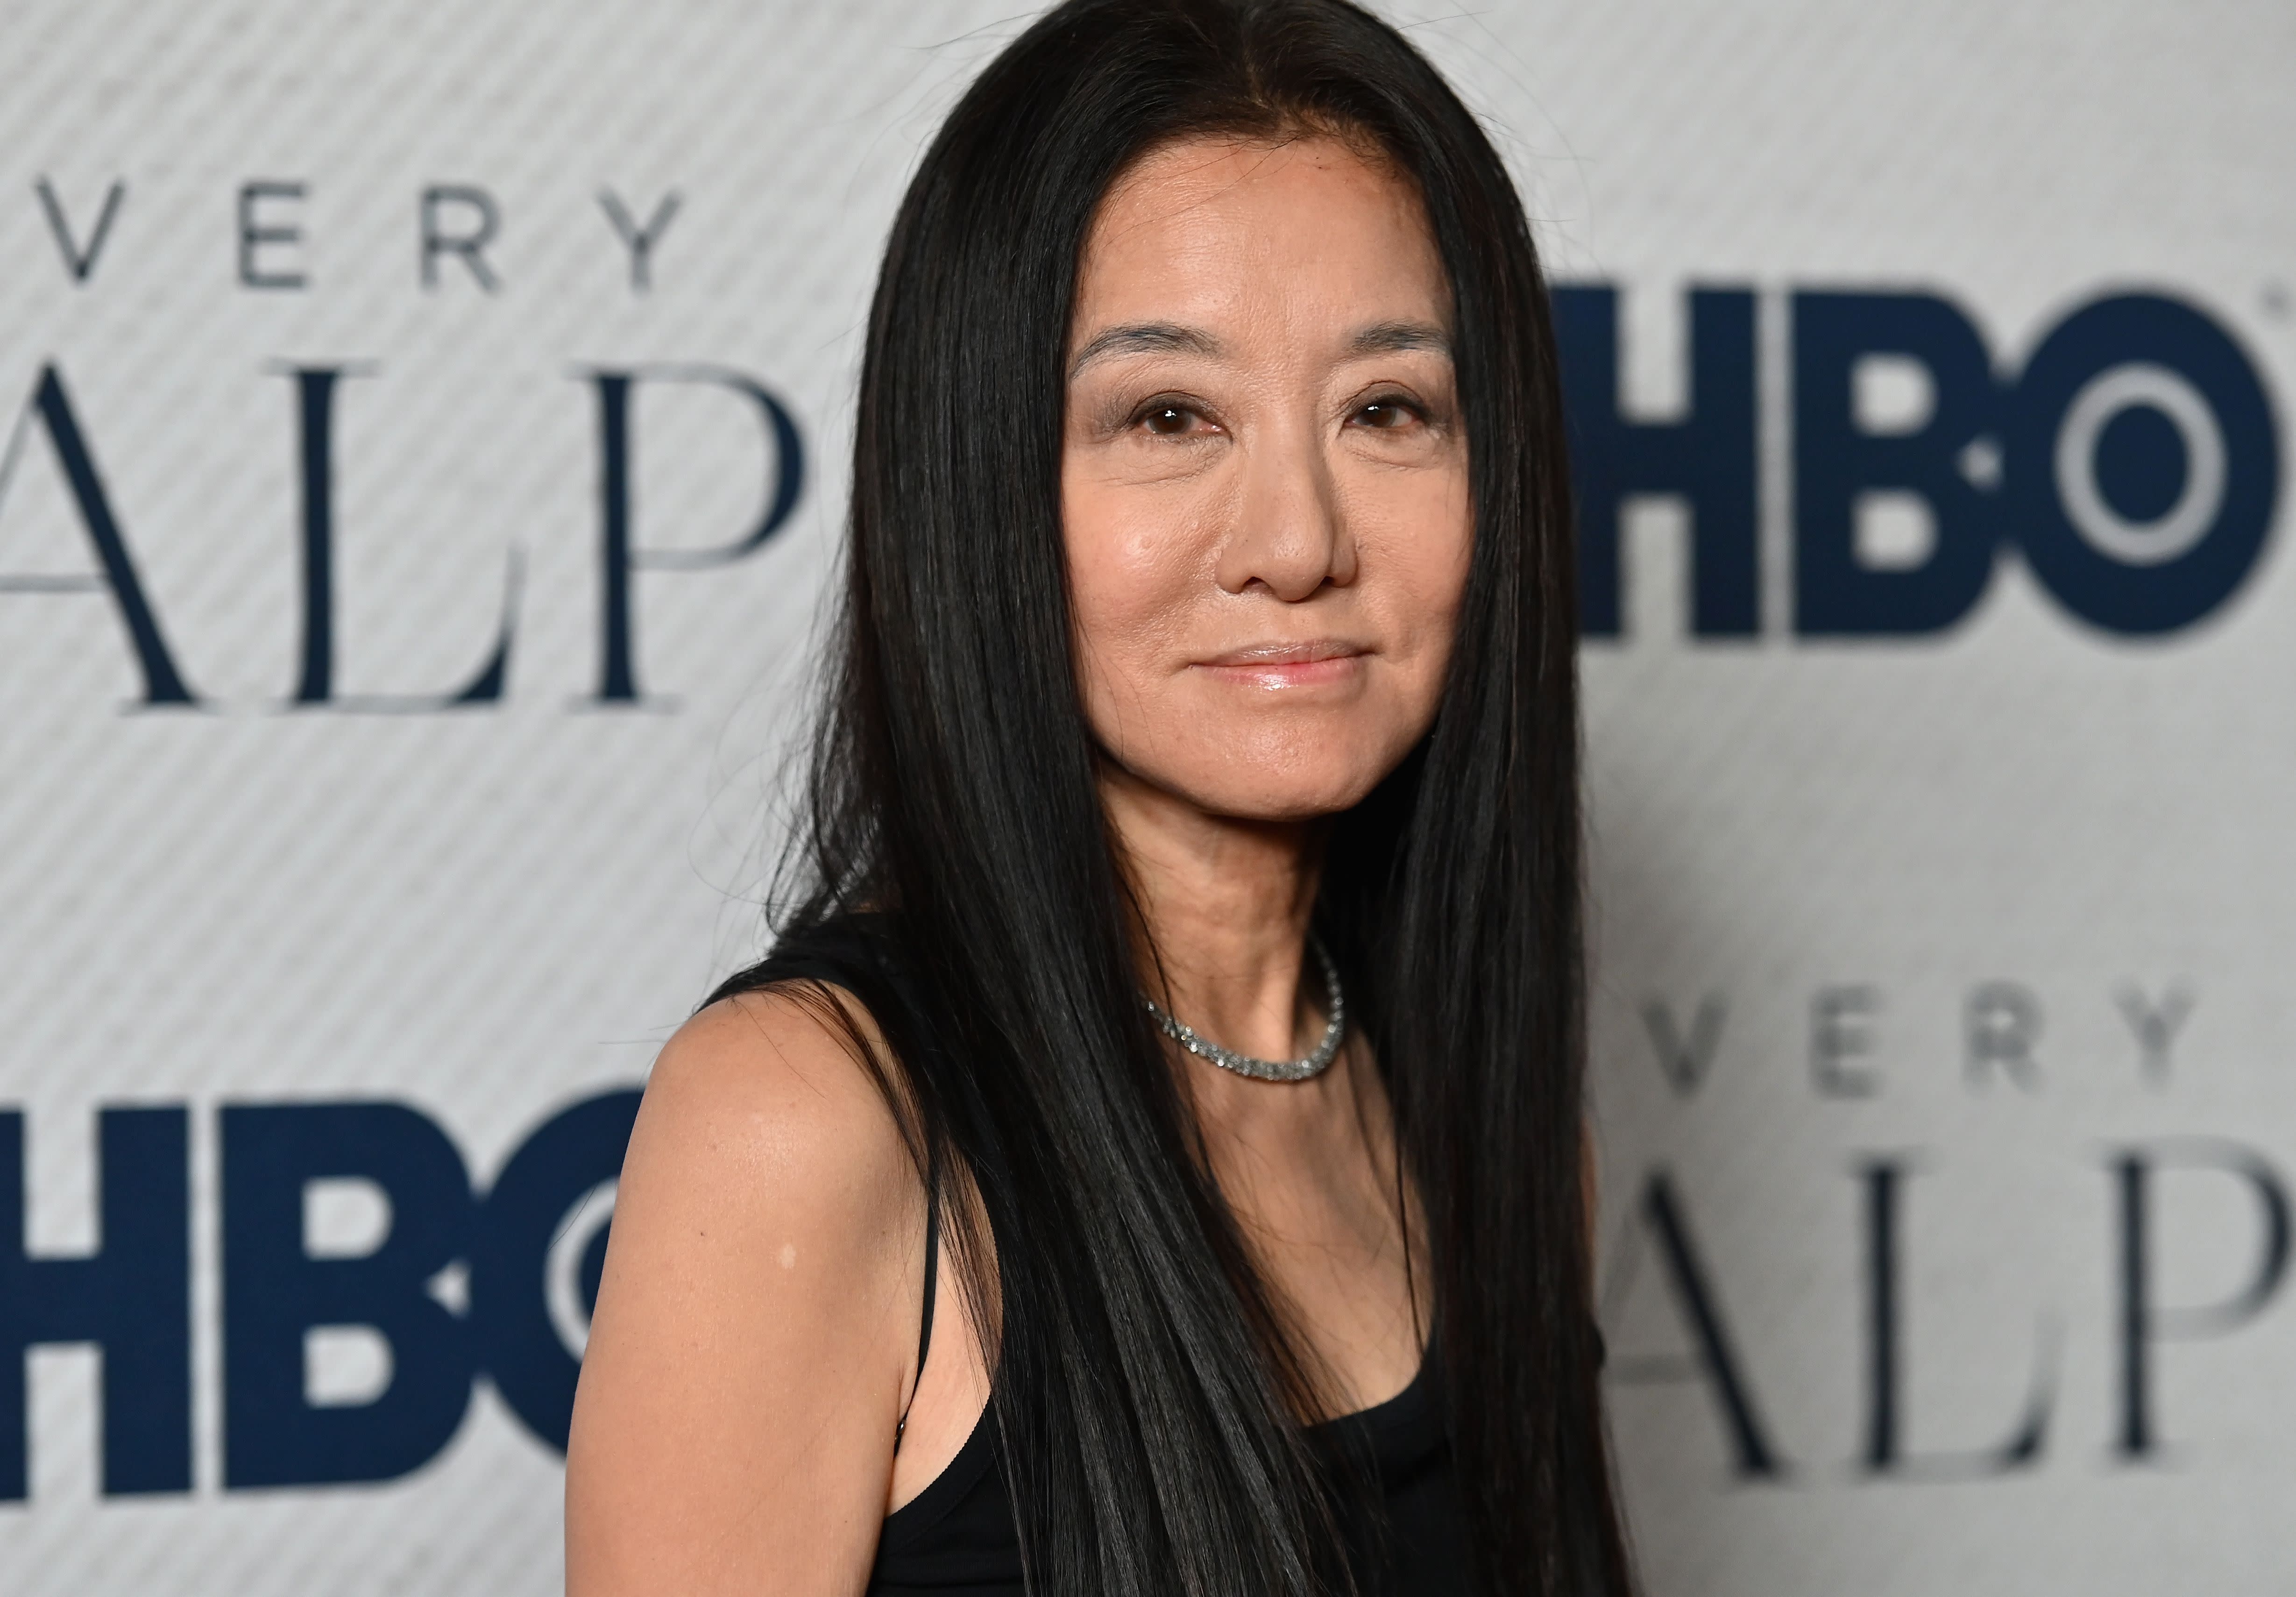 Vera Wang 71 Looks Flawless While Celebrating Pride Month